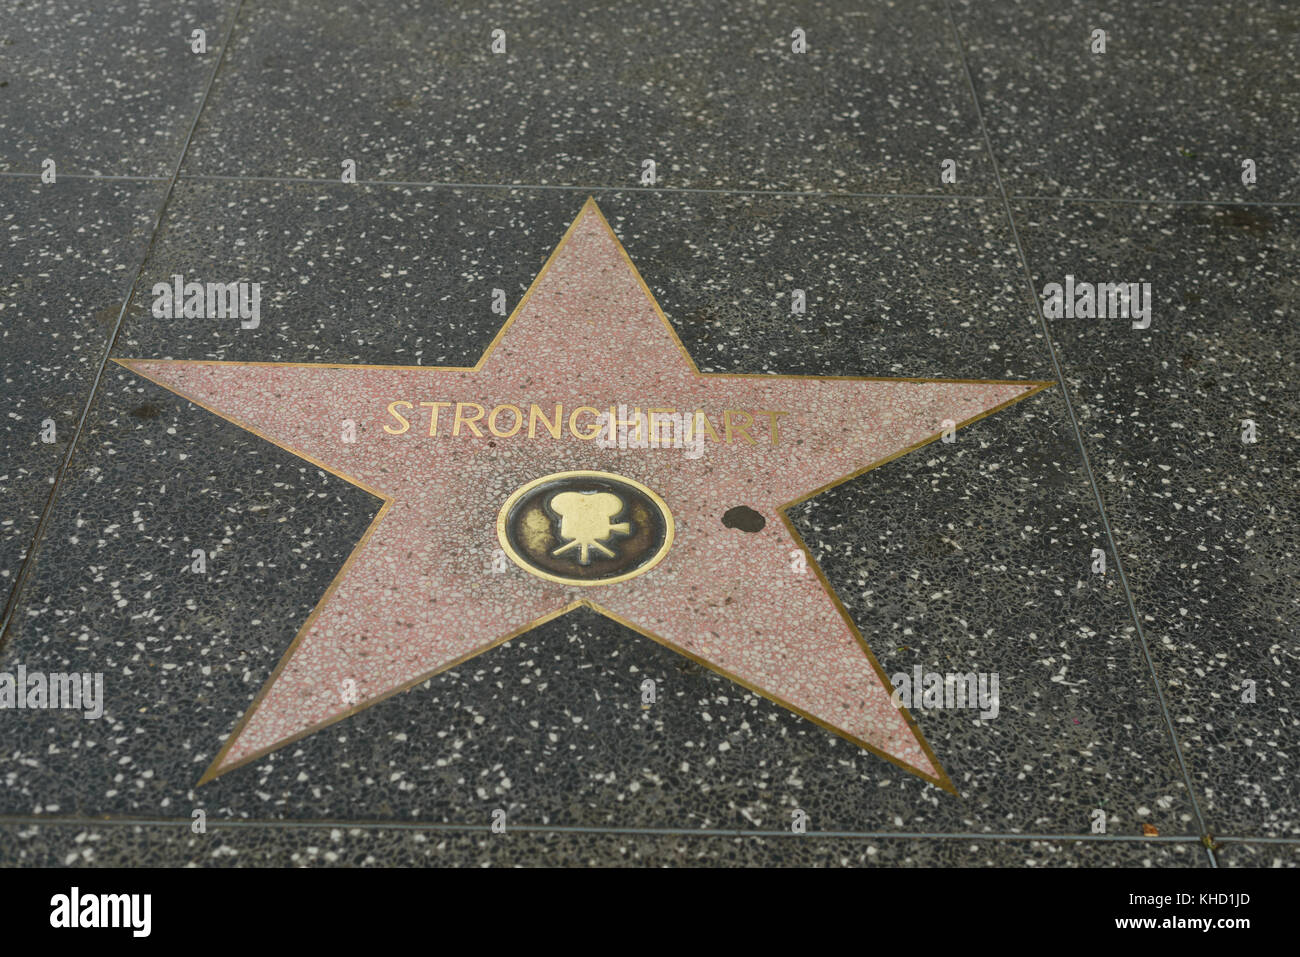 HOLLYWOOD, CA - DICEMBRE 06: Strongheart stella sulla Hollywood Walk of Fame a Hollywood, California il 6 dicembre 2016. Foto Stock